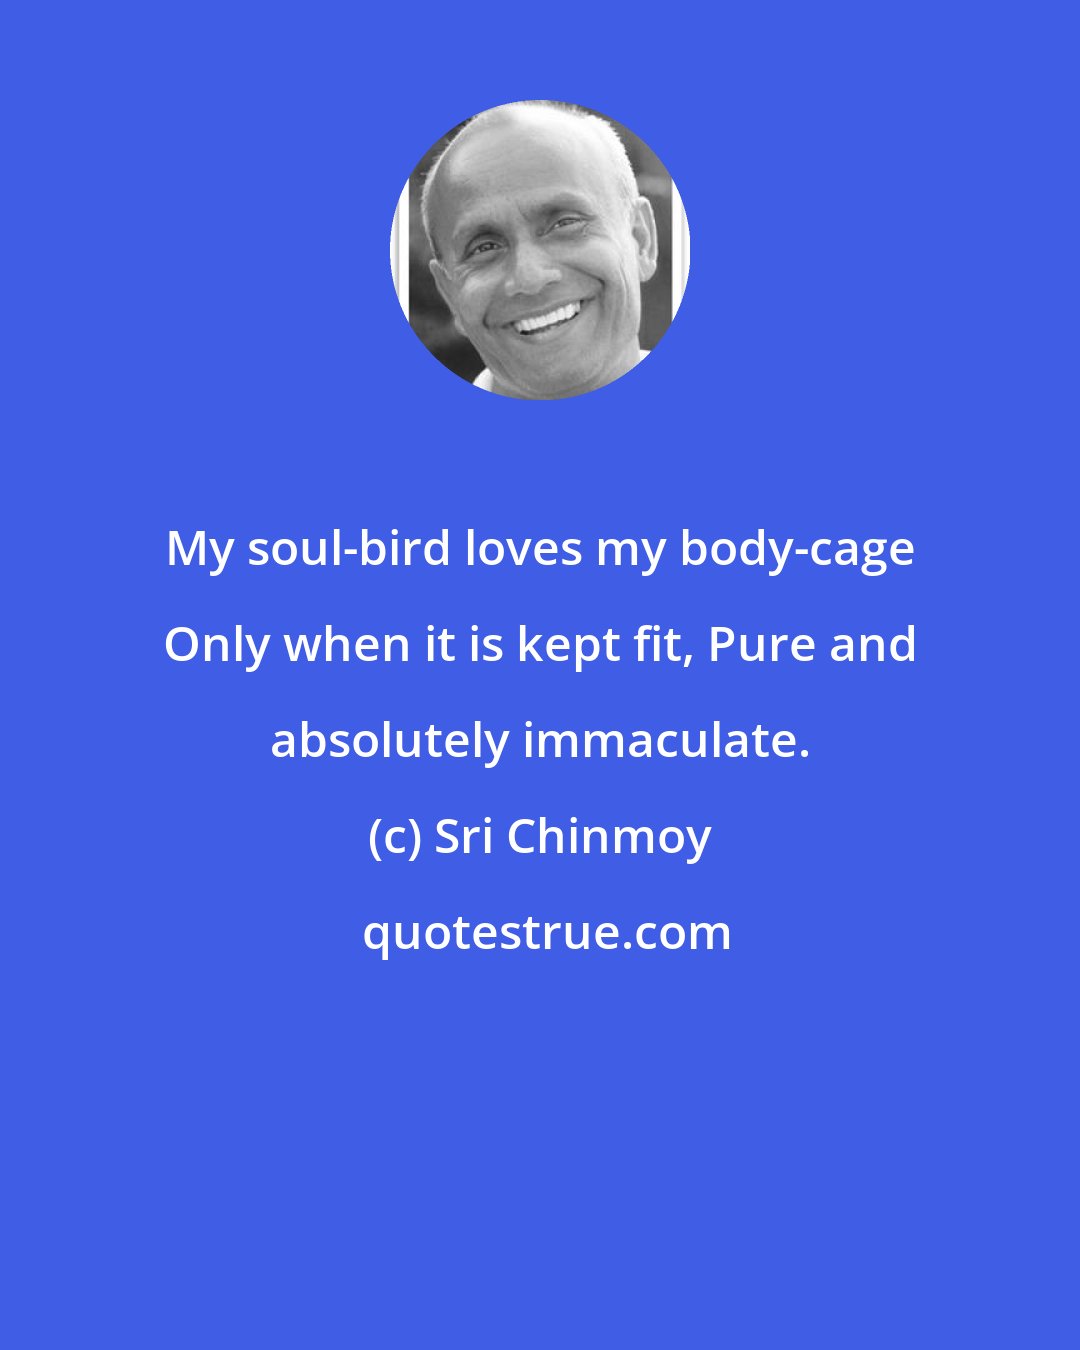 Sri Chinmoy: My soul-bird loves my body-cage Only when it is kept fit, Pure and absolutely immaculate.